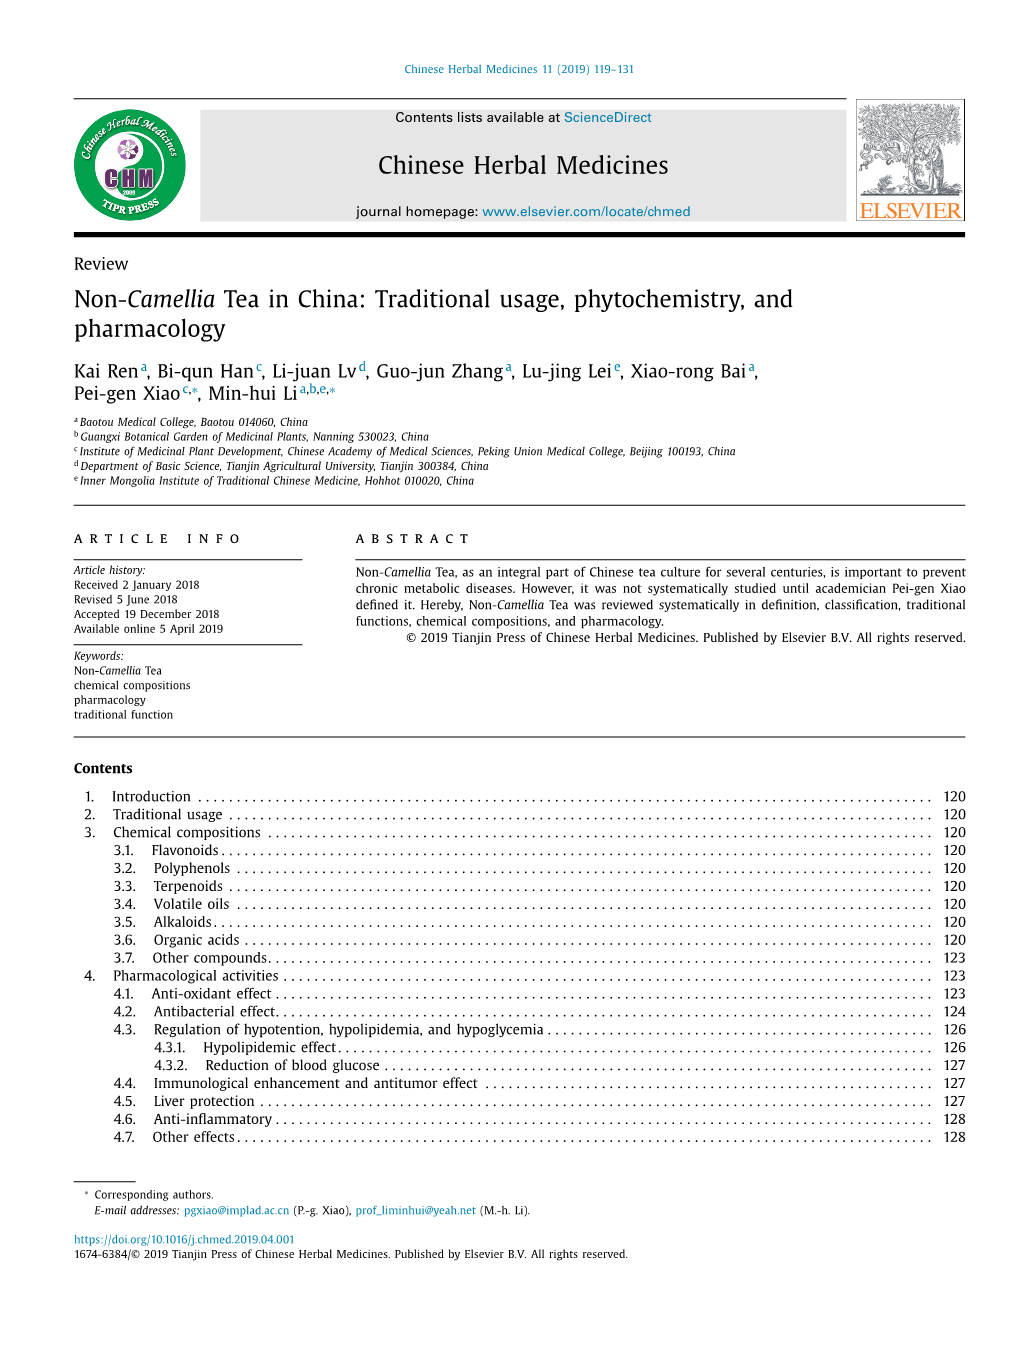 Non-Camellia Tea in China: Traditional Usage, Phytochemistry, and Pharmacology